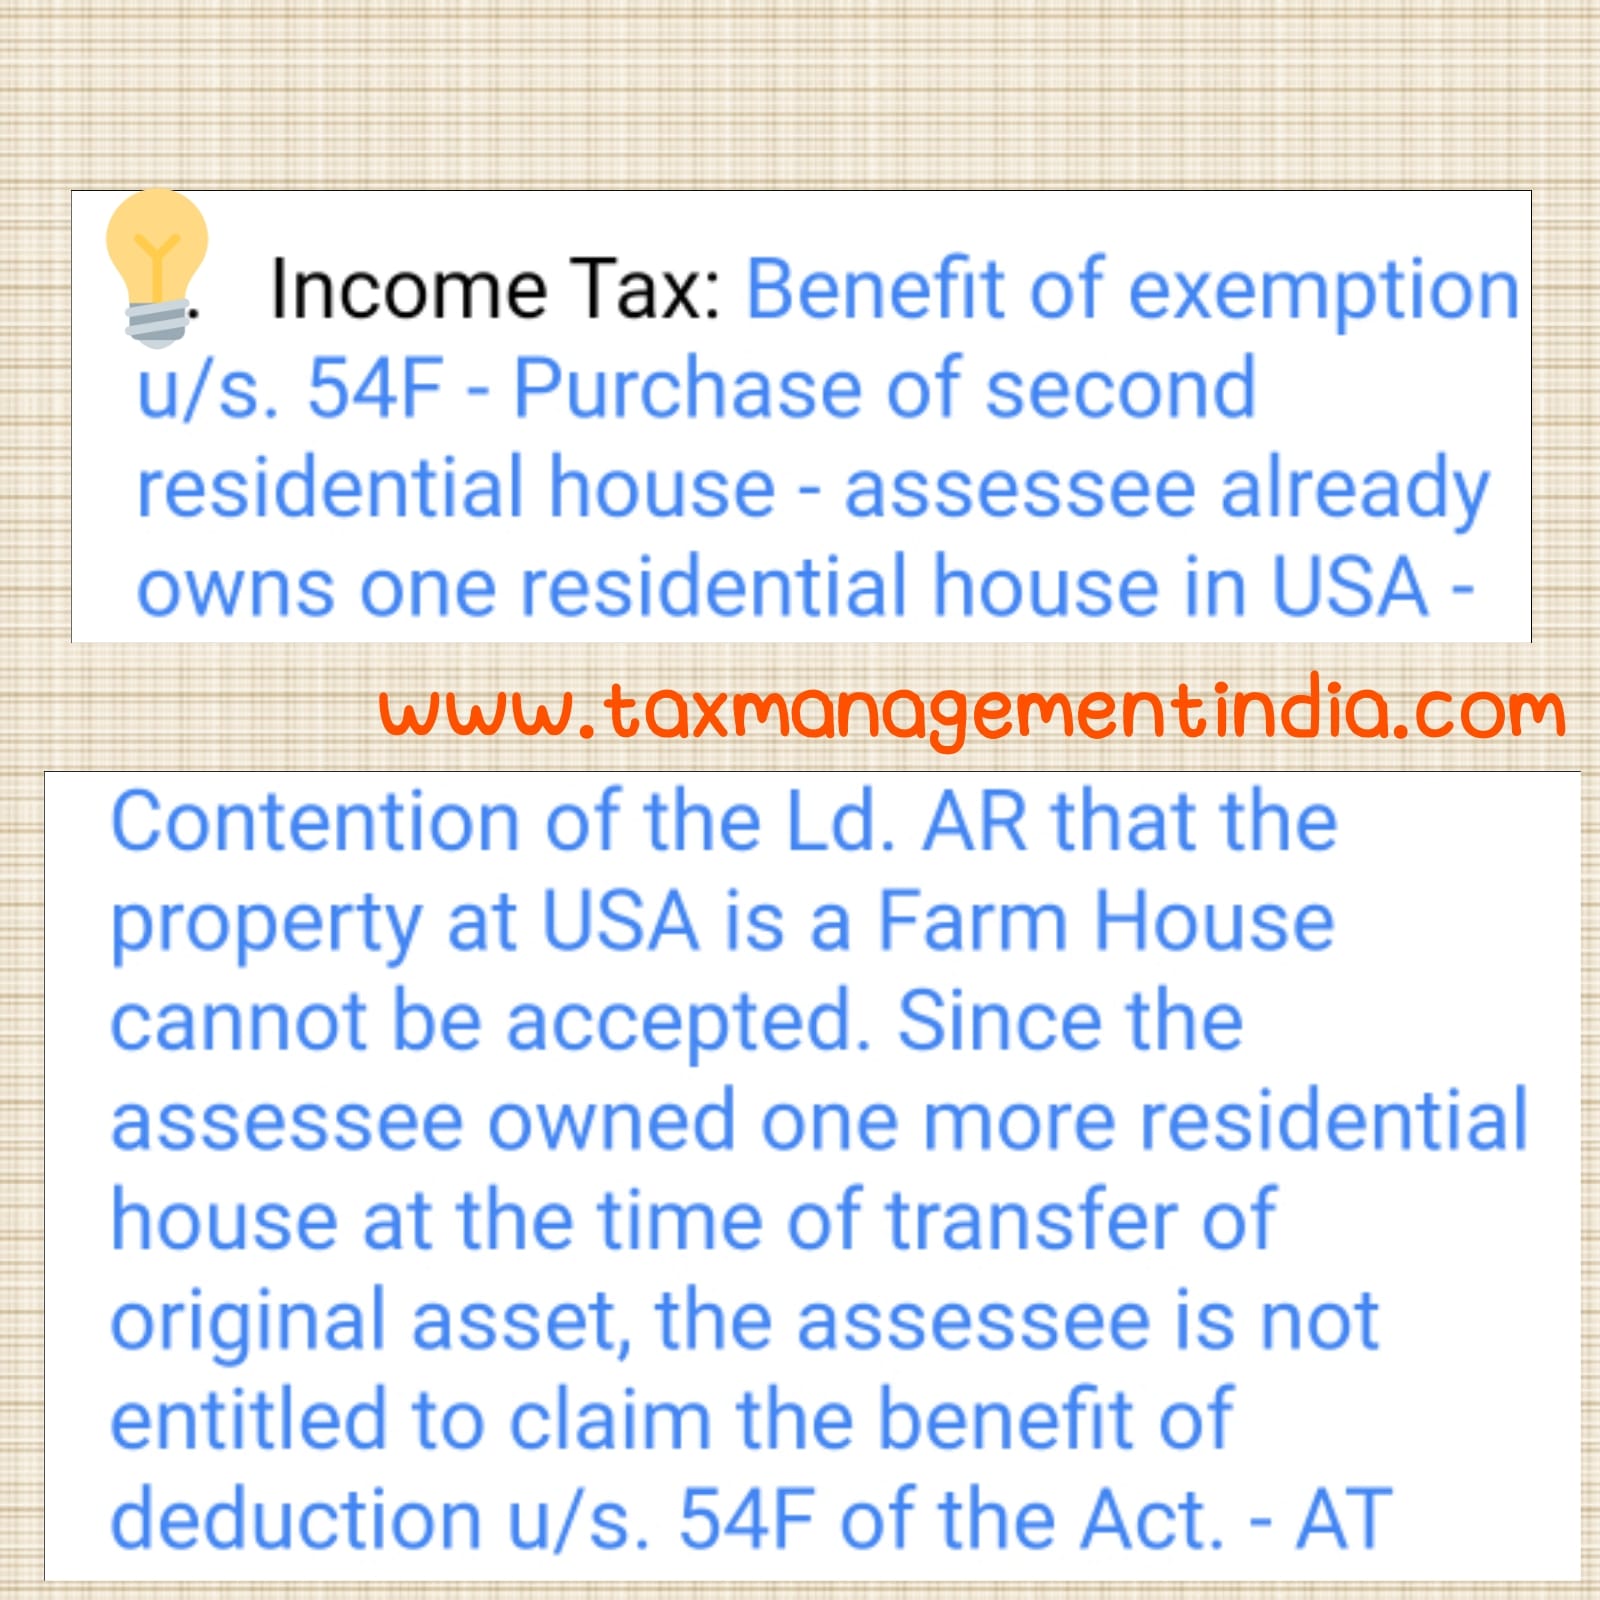 income-tax-ltcg-benefit-of-exemption-u-s-54f-purchase-of-second